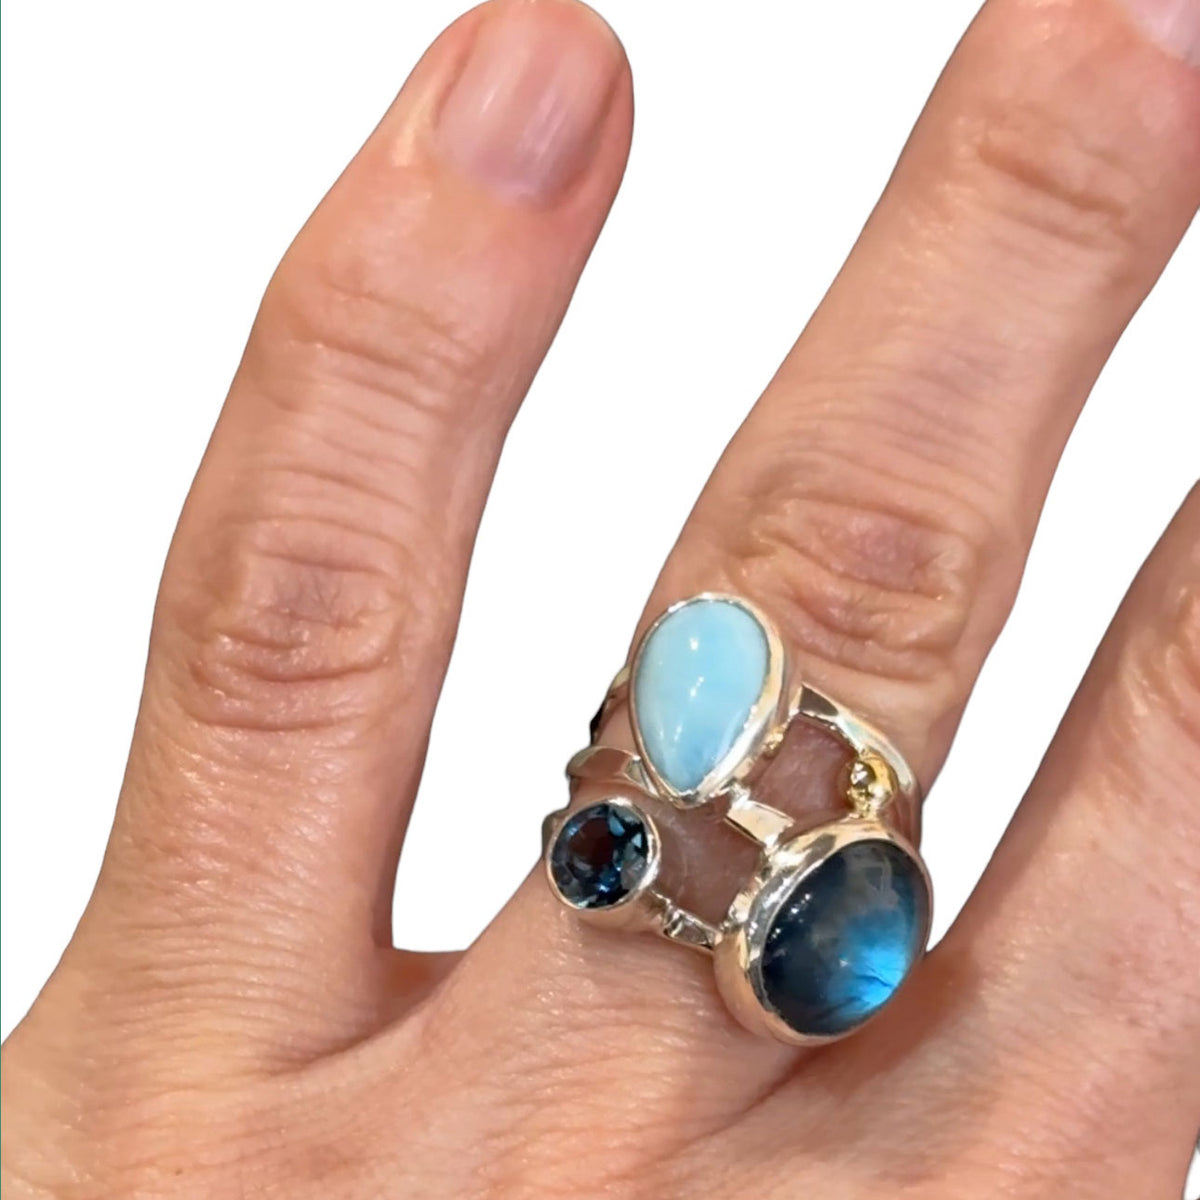 Larimar Rings with Labradorite and Blue Topaz